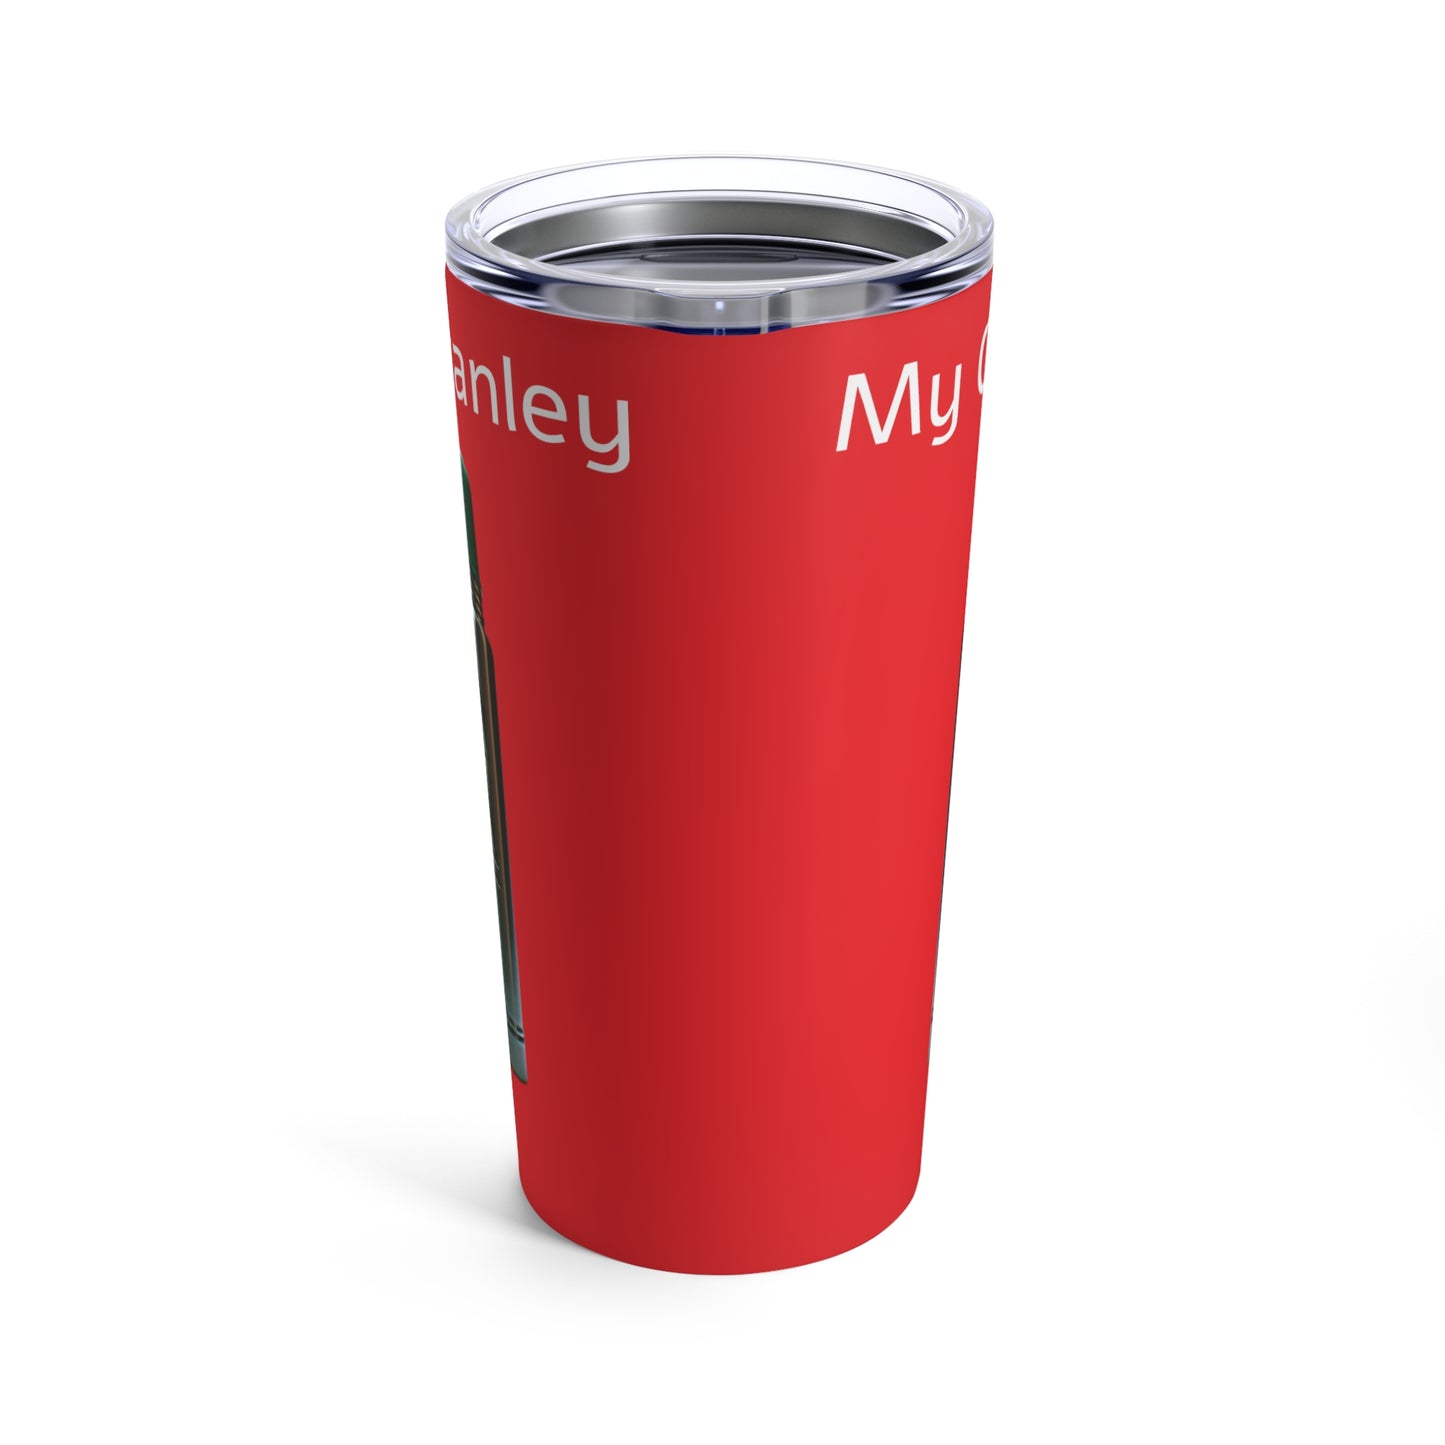 My Other Mug is a Stanley  20oz Tumbler - red